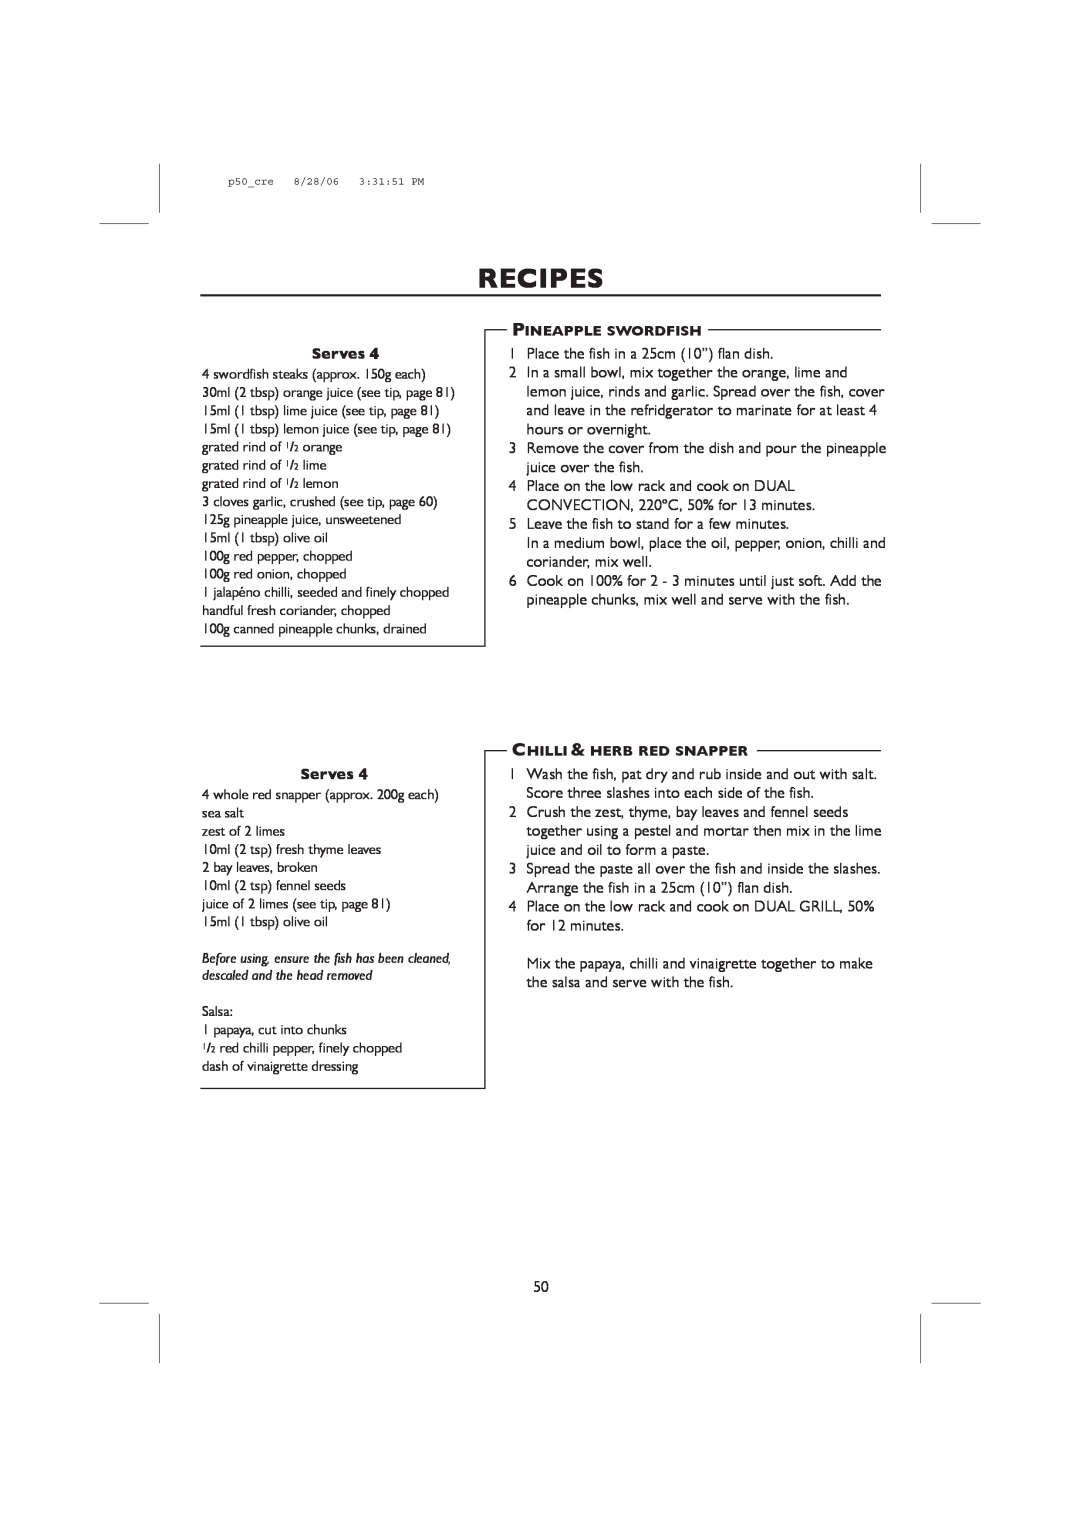 Sharp R-98STM-A, R-959M operation manual Recipes, Serves, Place the fish in a 25cm 10” flan dish 